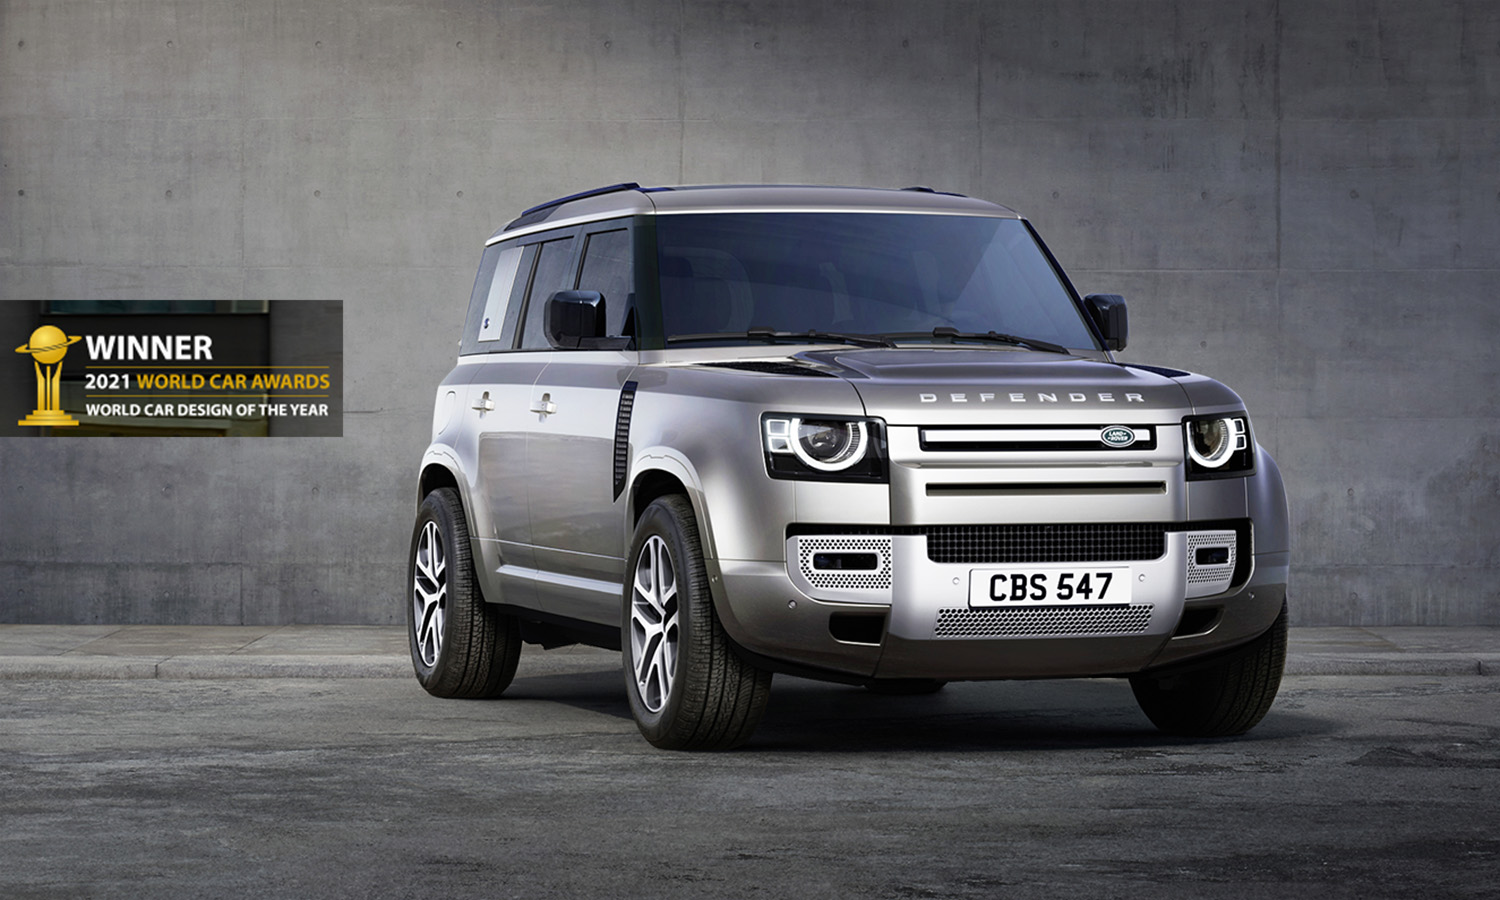 LAND ROVER NEW DEFENDER/ WORLD CAR DESIGN OF THE YEAR 2021